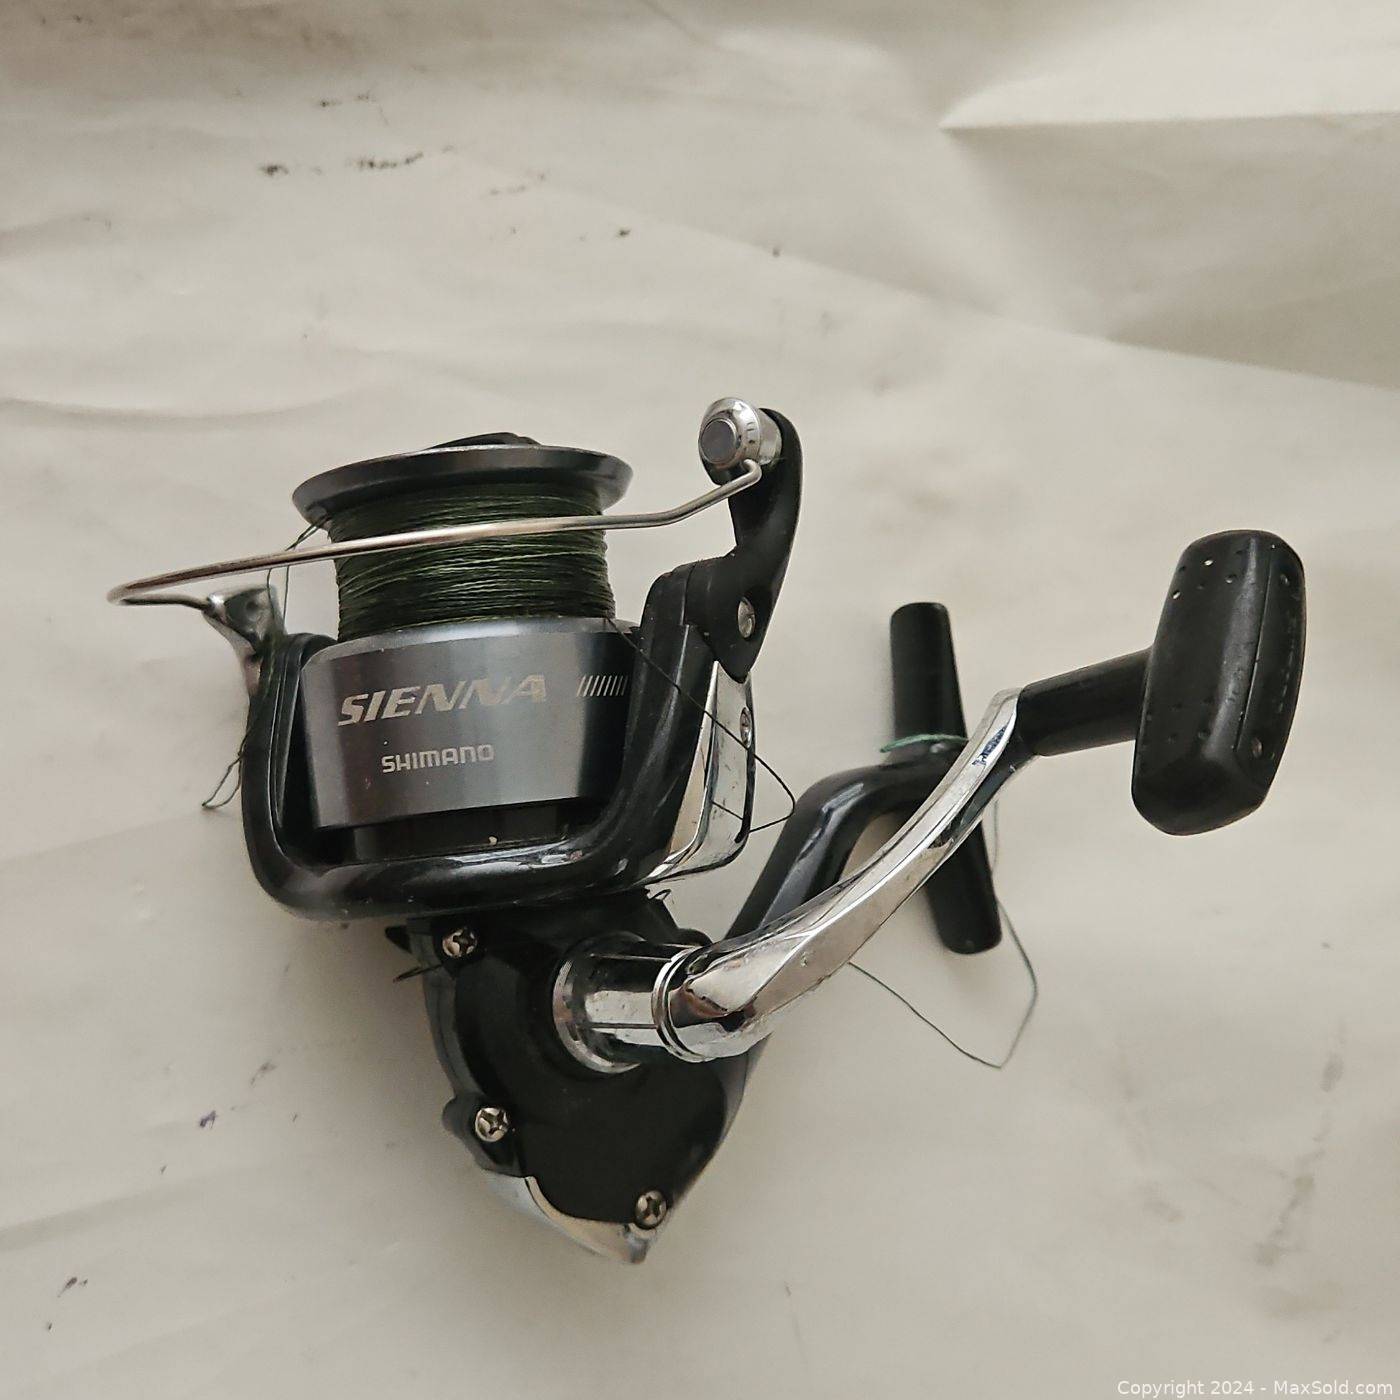 https://d12srav5gxm0re.cloudfront.net/auctionimages/90053/1712419530/wshimano_4000fe_spinning_fishing_reel-4-1.jpg